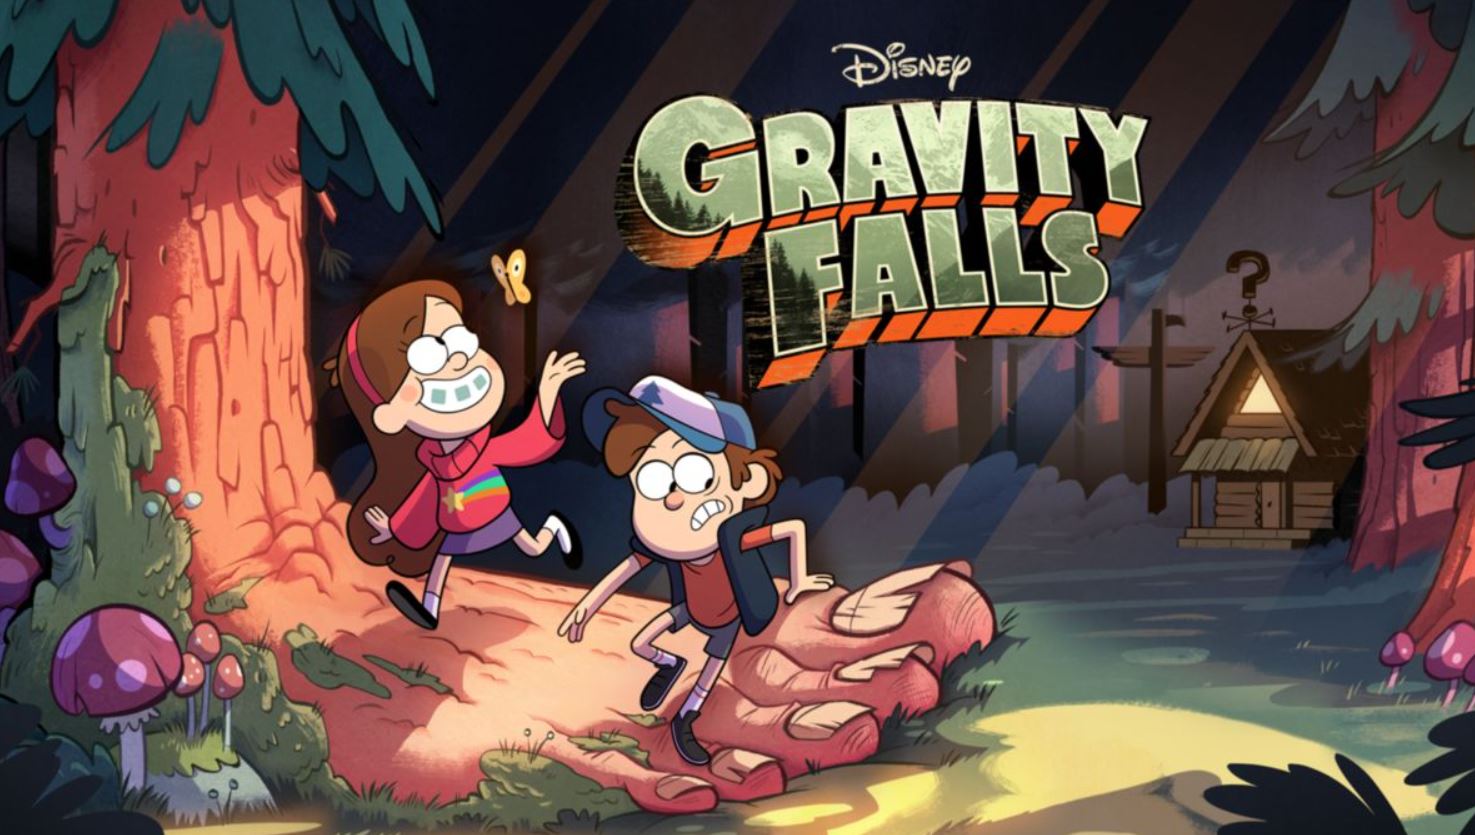 Gravity Falls Season 3: Find out the Latest Updates